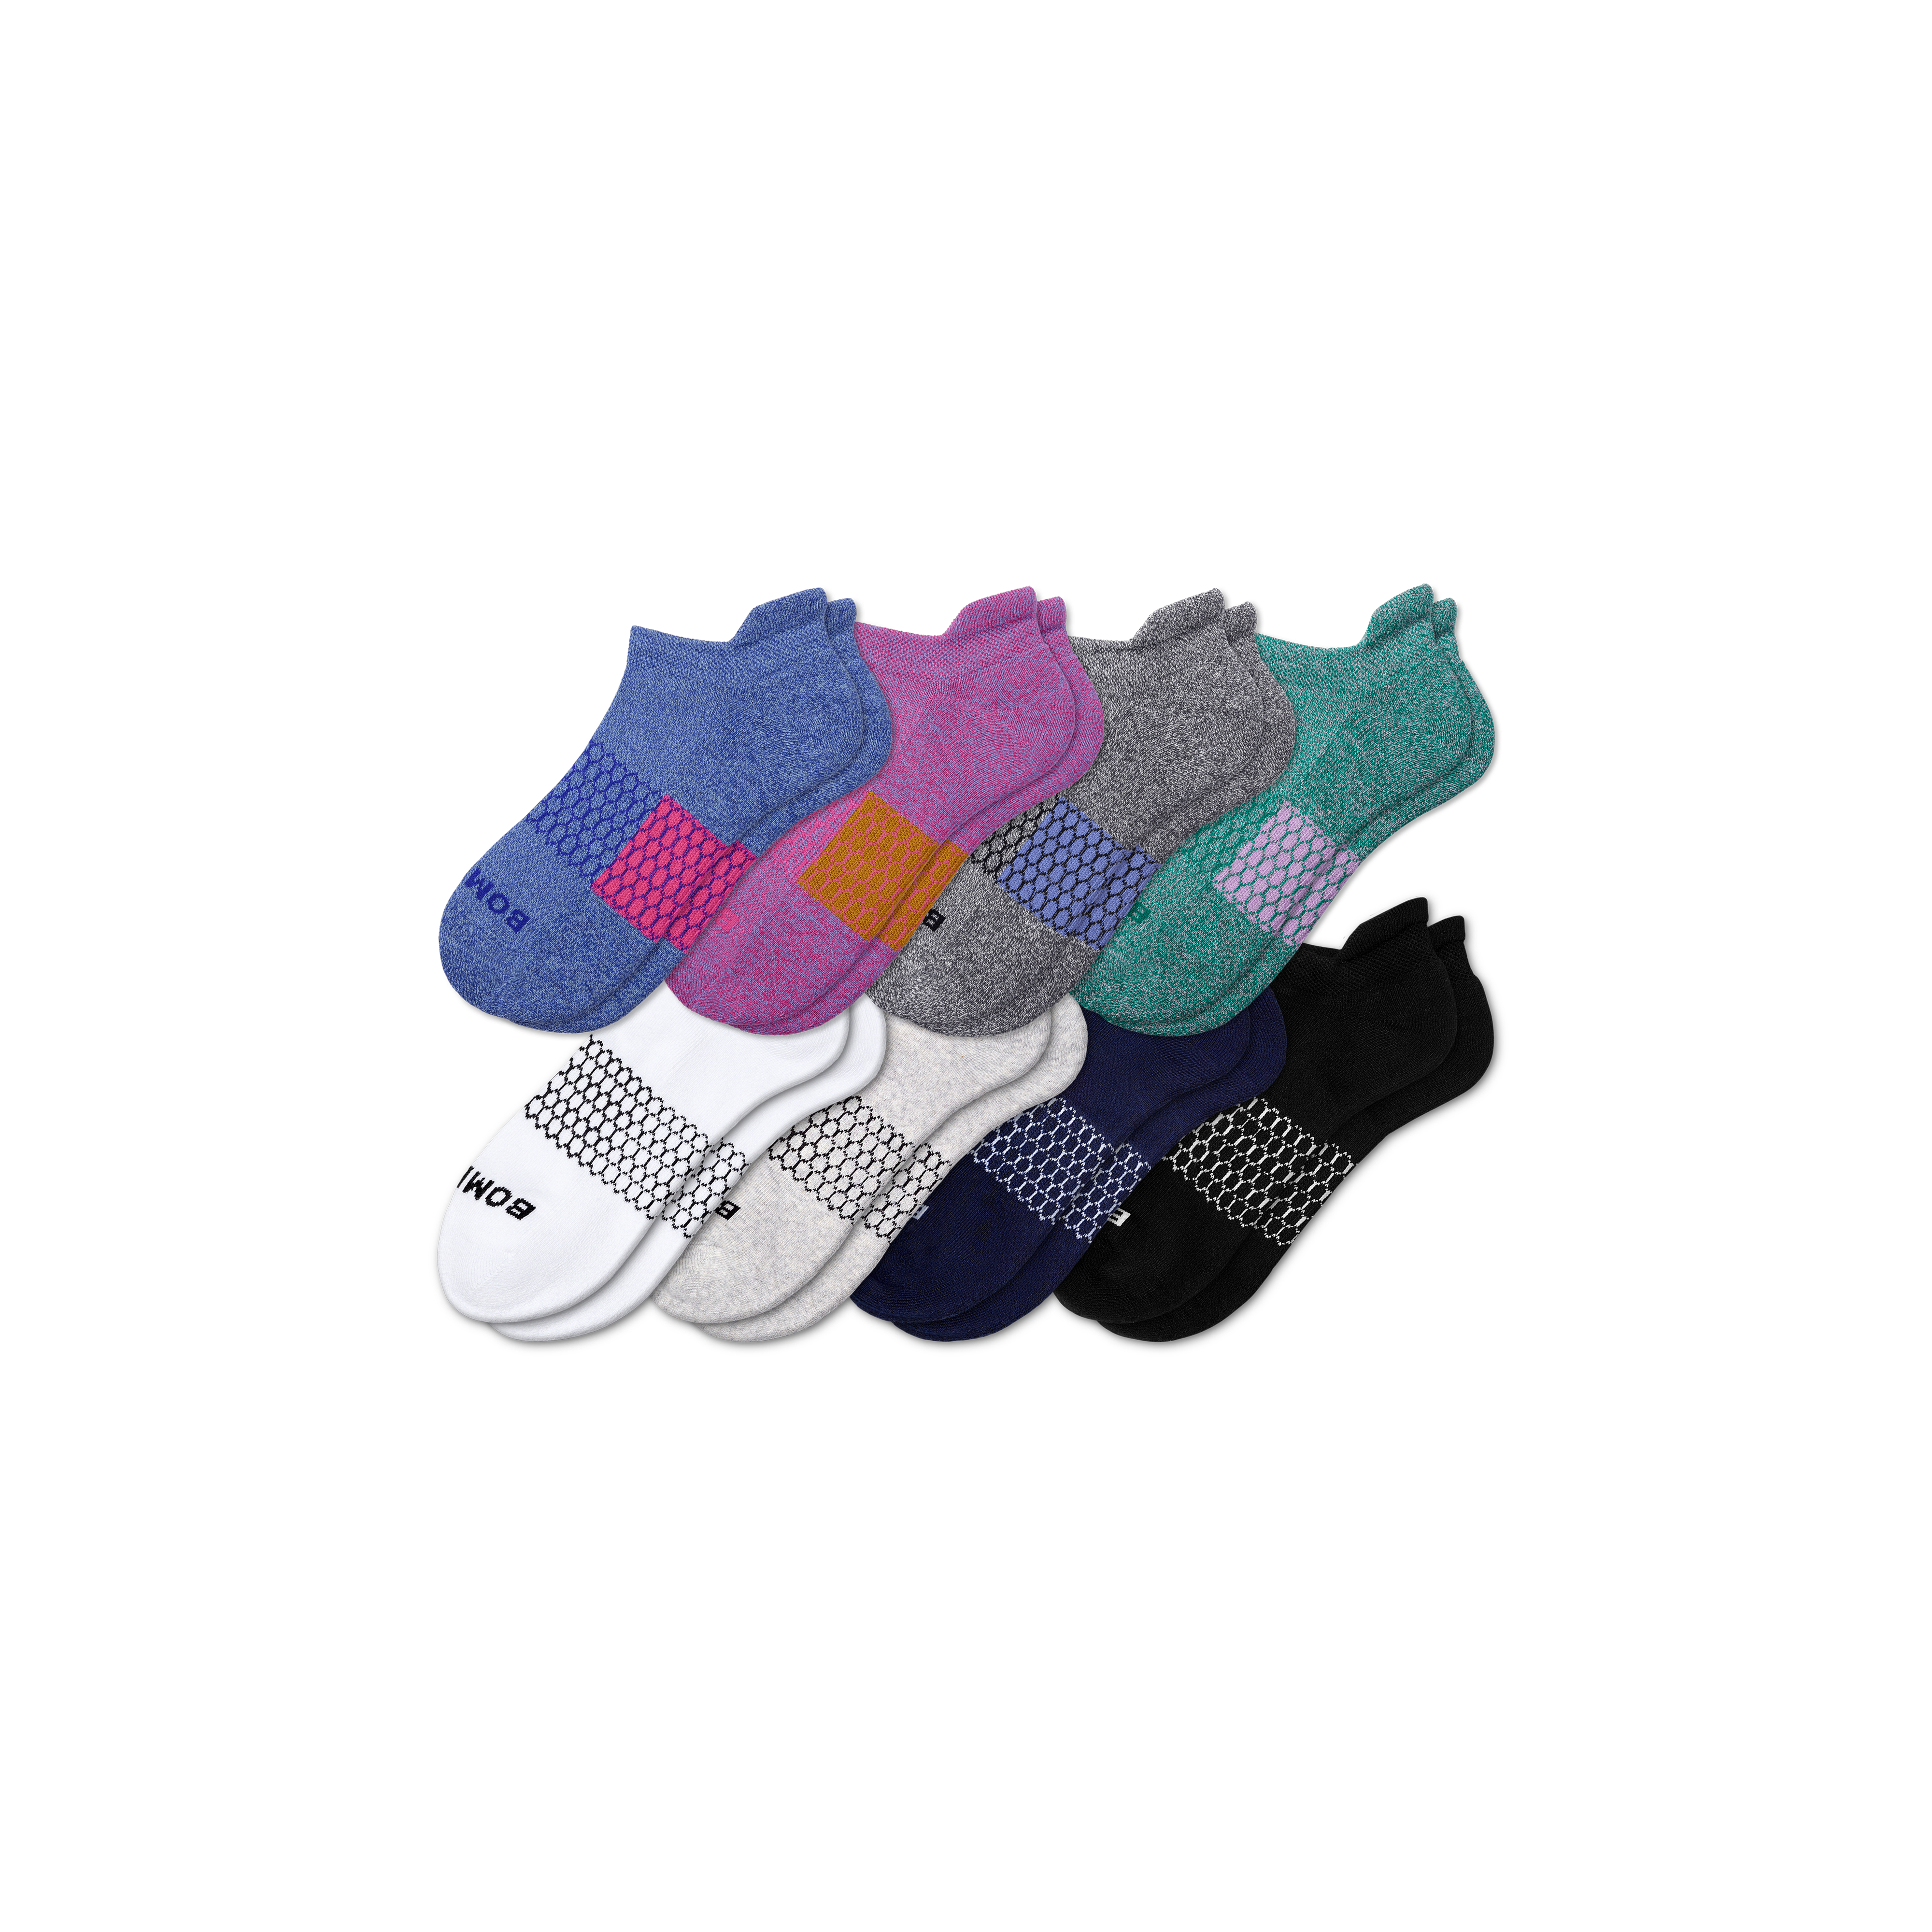 Bombas Ankle Sock 8-pack In Marls Solids Mix